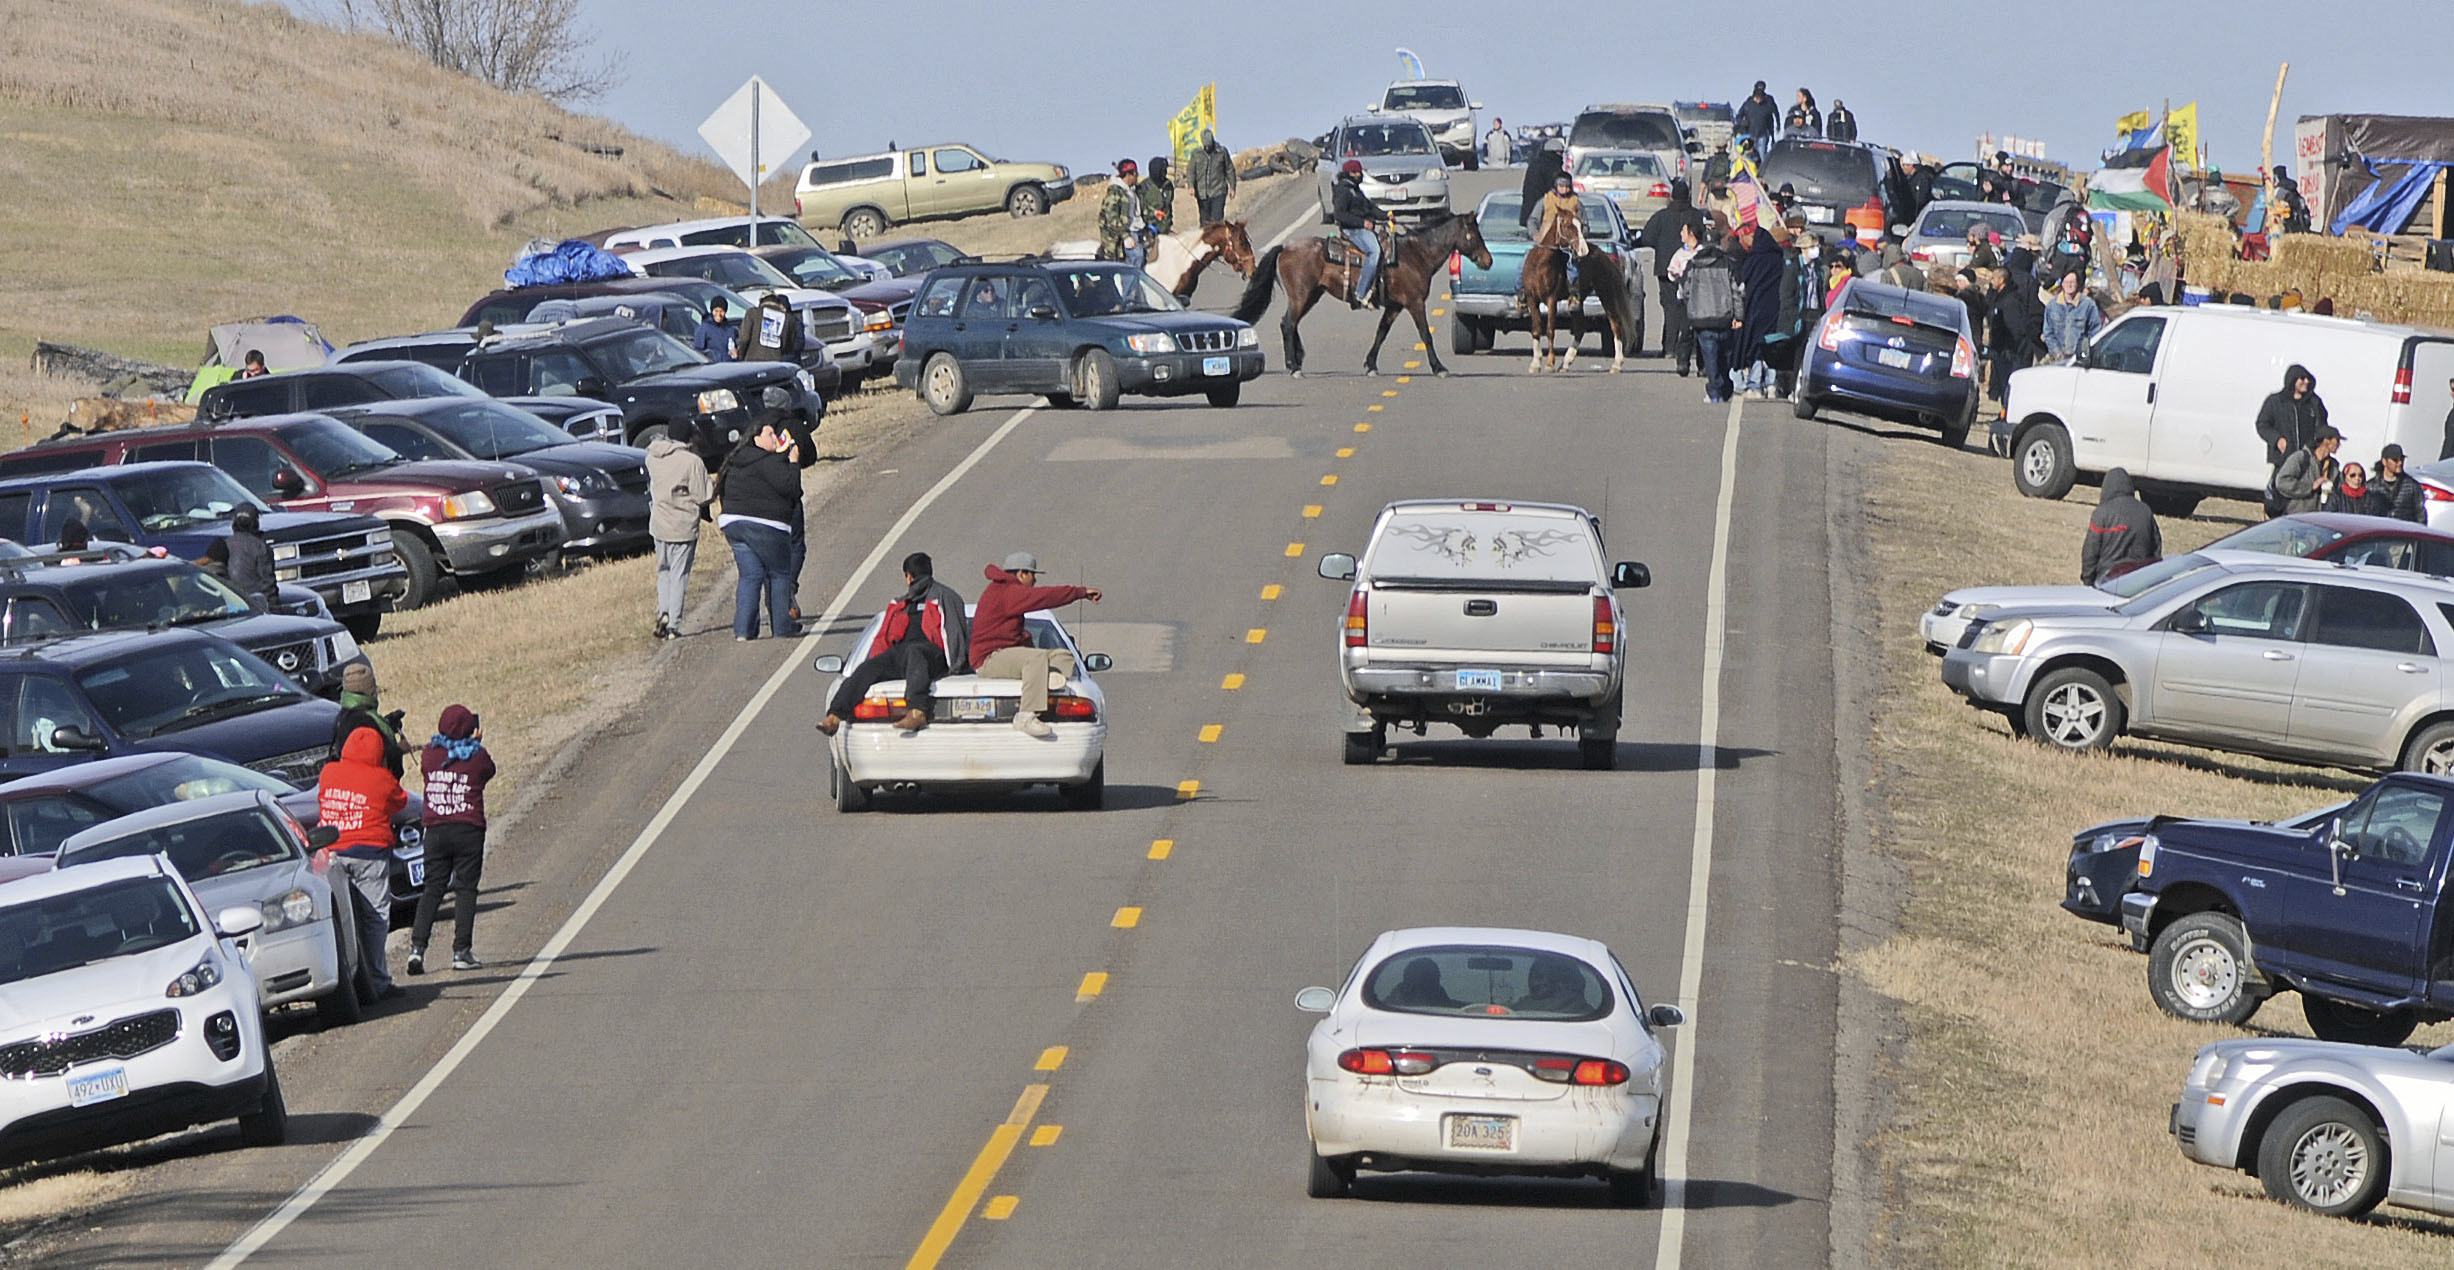 PHOTO: People protesting the Dakota Access Pipeline gather along North Dakota Highway 1806 in Morton County at the site of a new camp that was being put together, Oct. 24, 2016, in Cannonball, North Dakota.